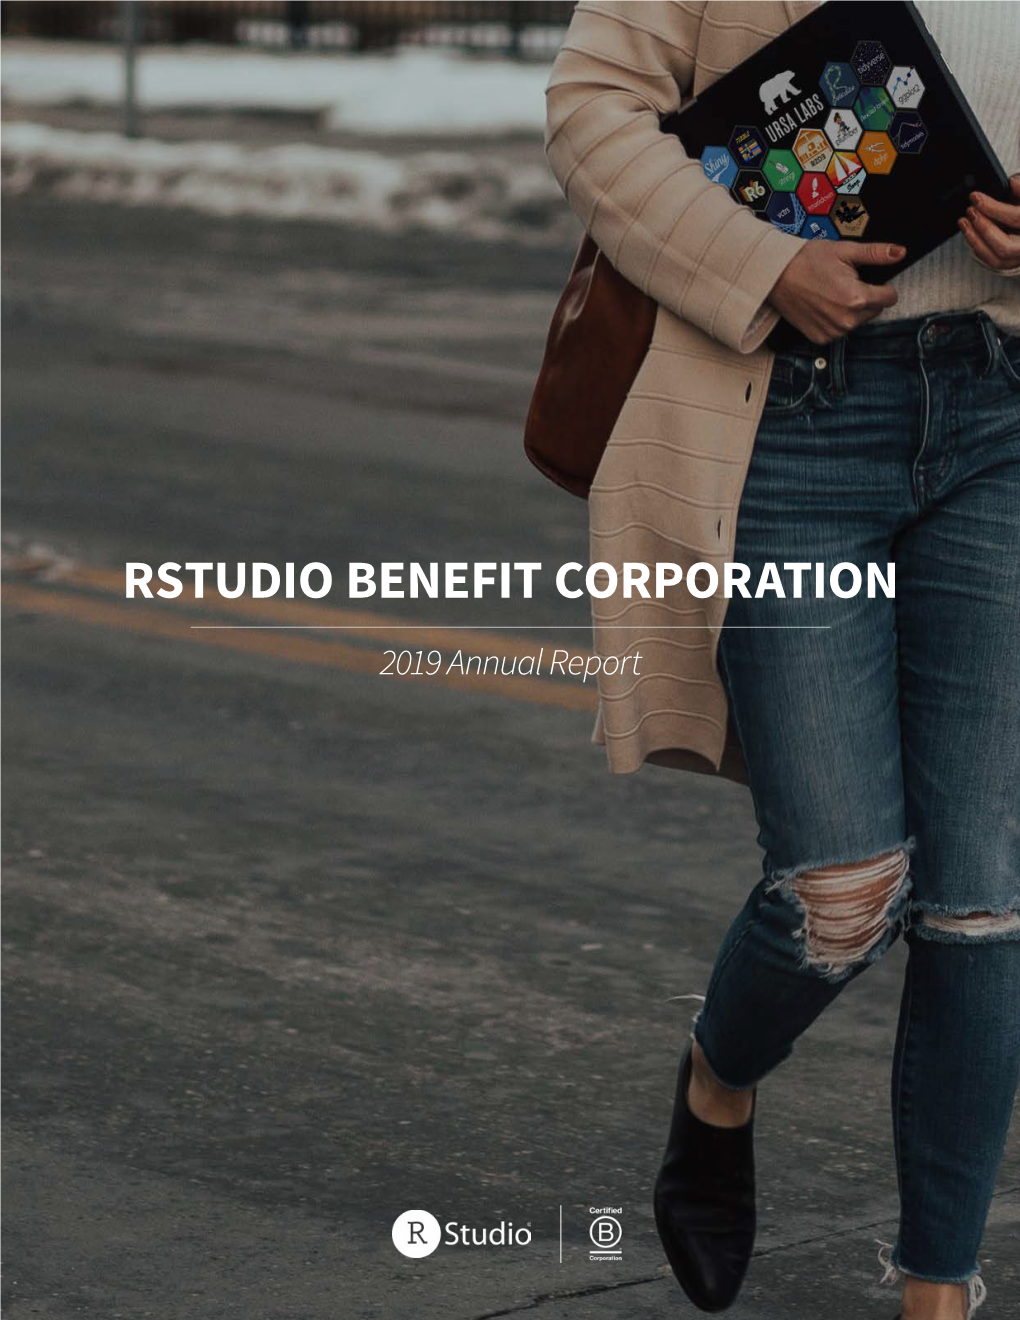 RSTUDIO BENEFIT CORPORATION 2019 Annual Report a Message from Our CEO